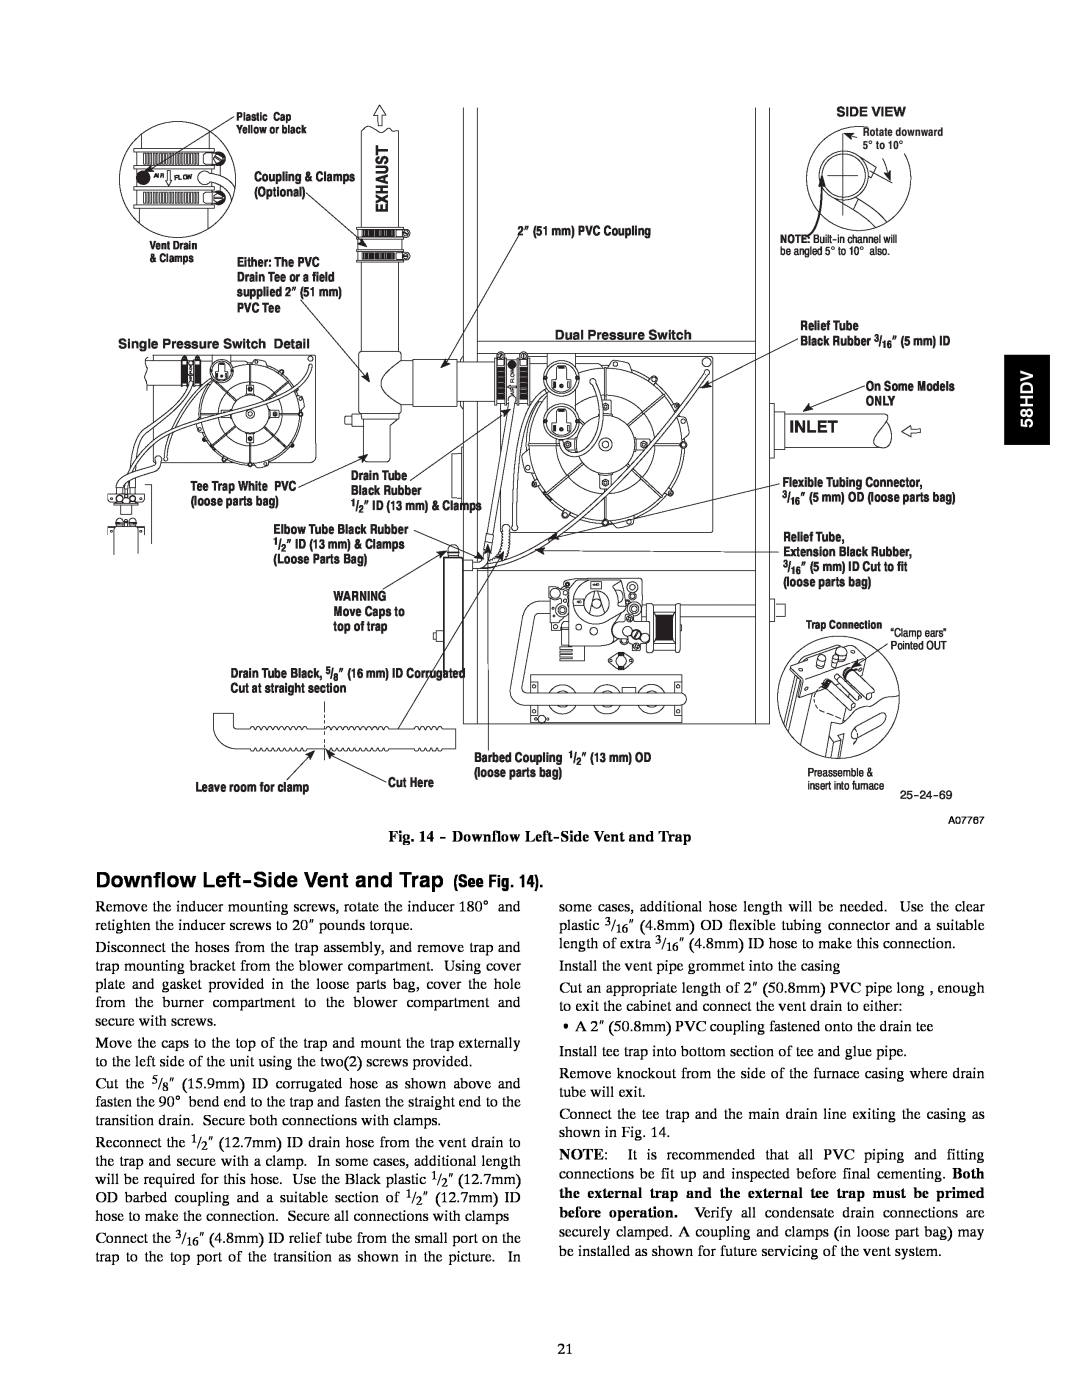 Carrier 58HDV installation instructions Downflow Left-SideVent and Trap See Fig, Exhaust, Inlet 